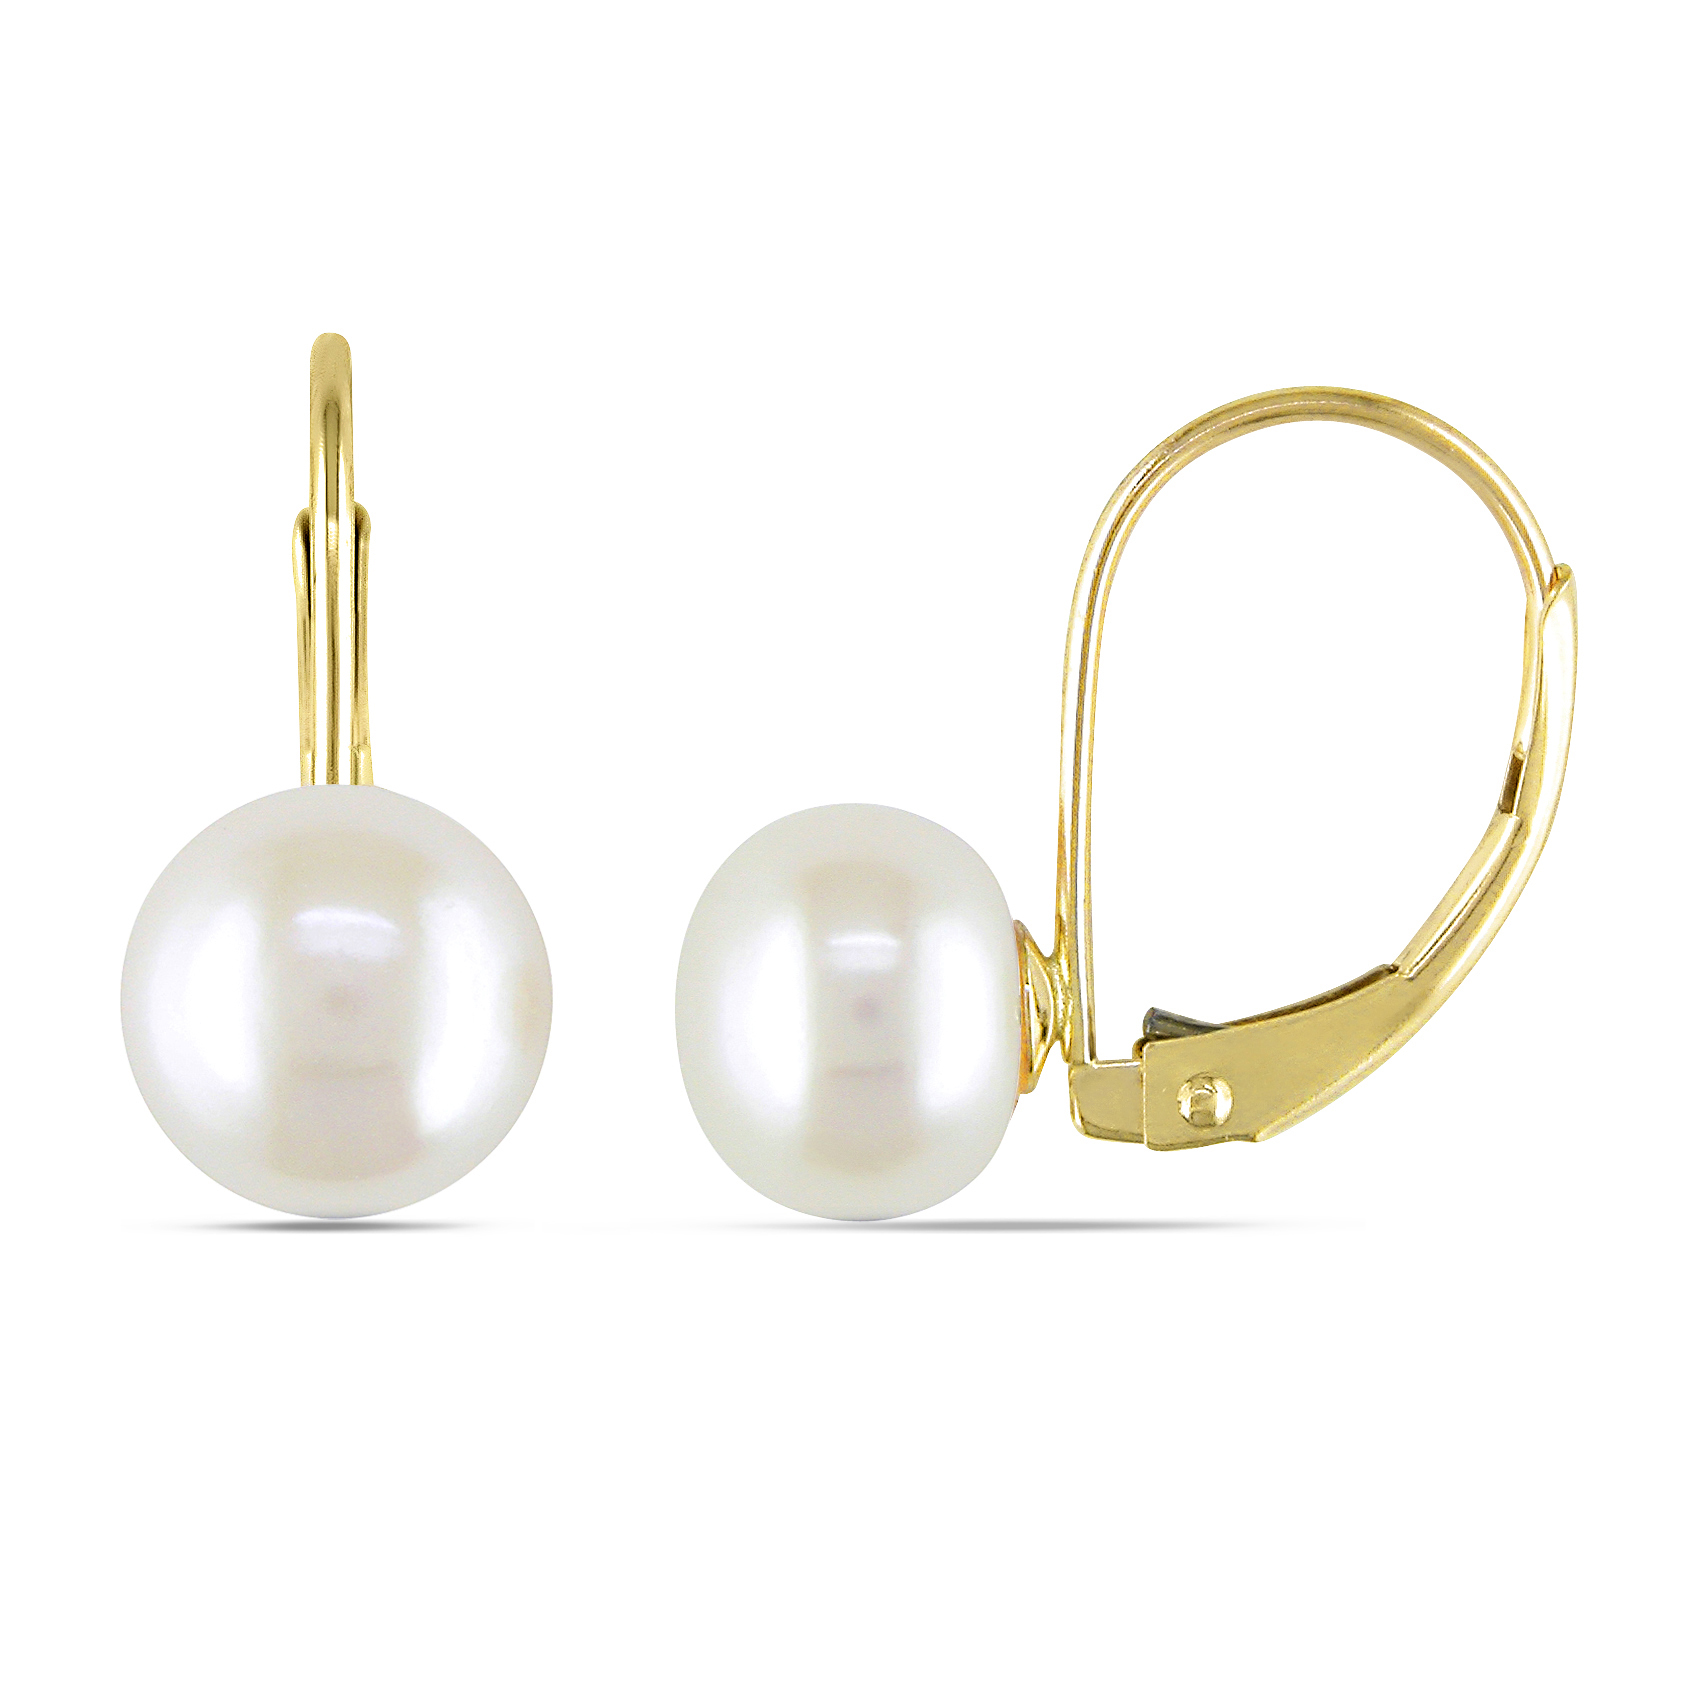 7 - 7.5 MM Cultured Freshwater Pearl Leverback Earrings in 10k Yellow Gold